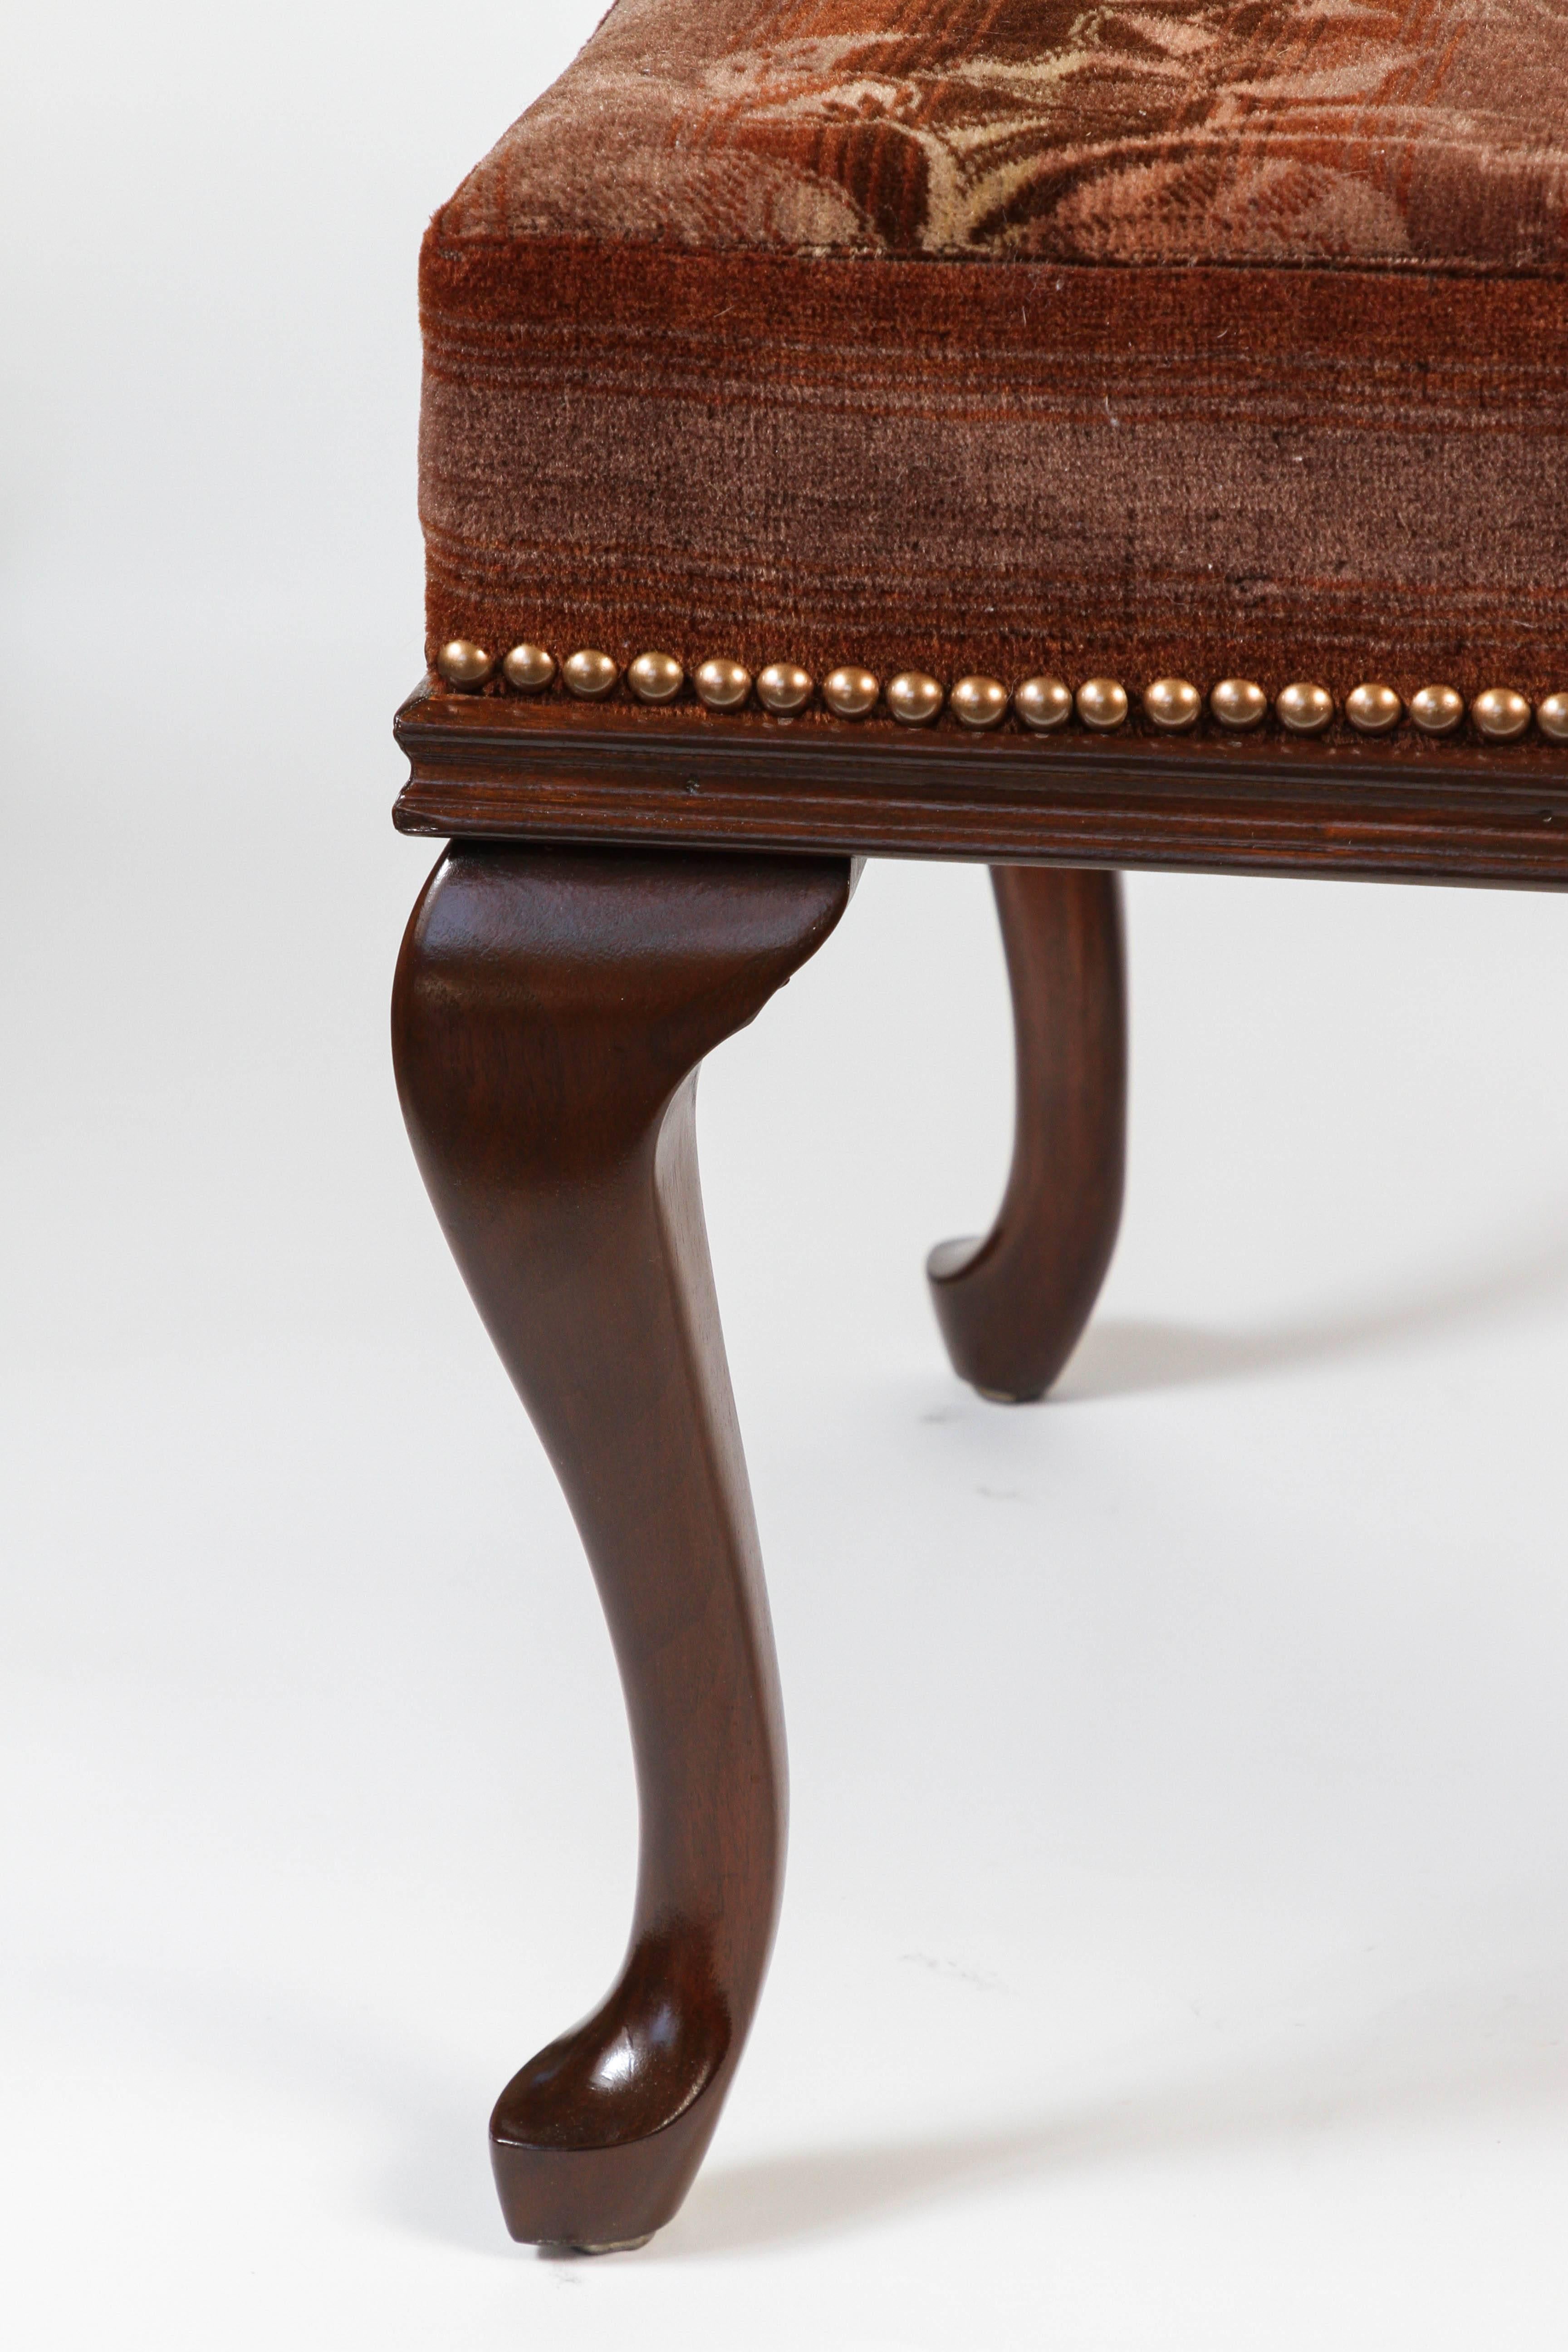 Antique stool with walnut Queen Anne legs that have been newly refinished, all new upholstery vintage wool mohair with floral motif and nailhead trim.